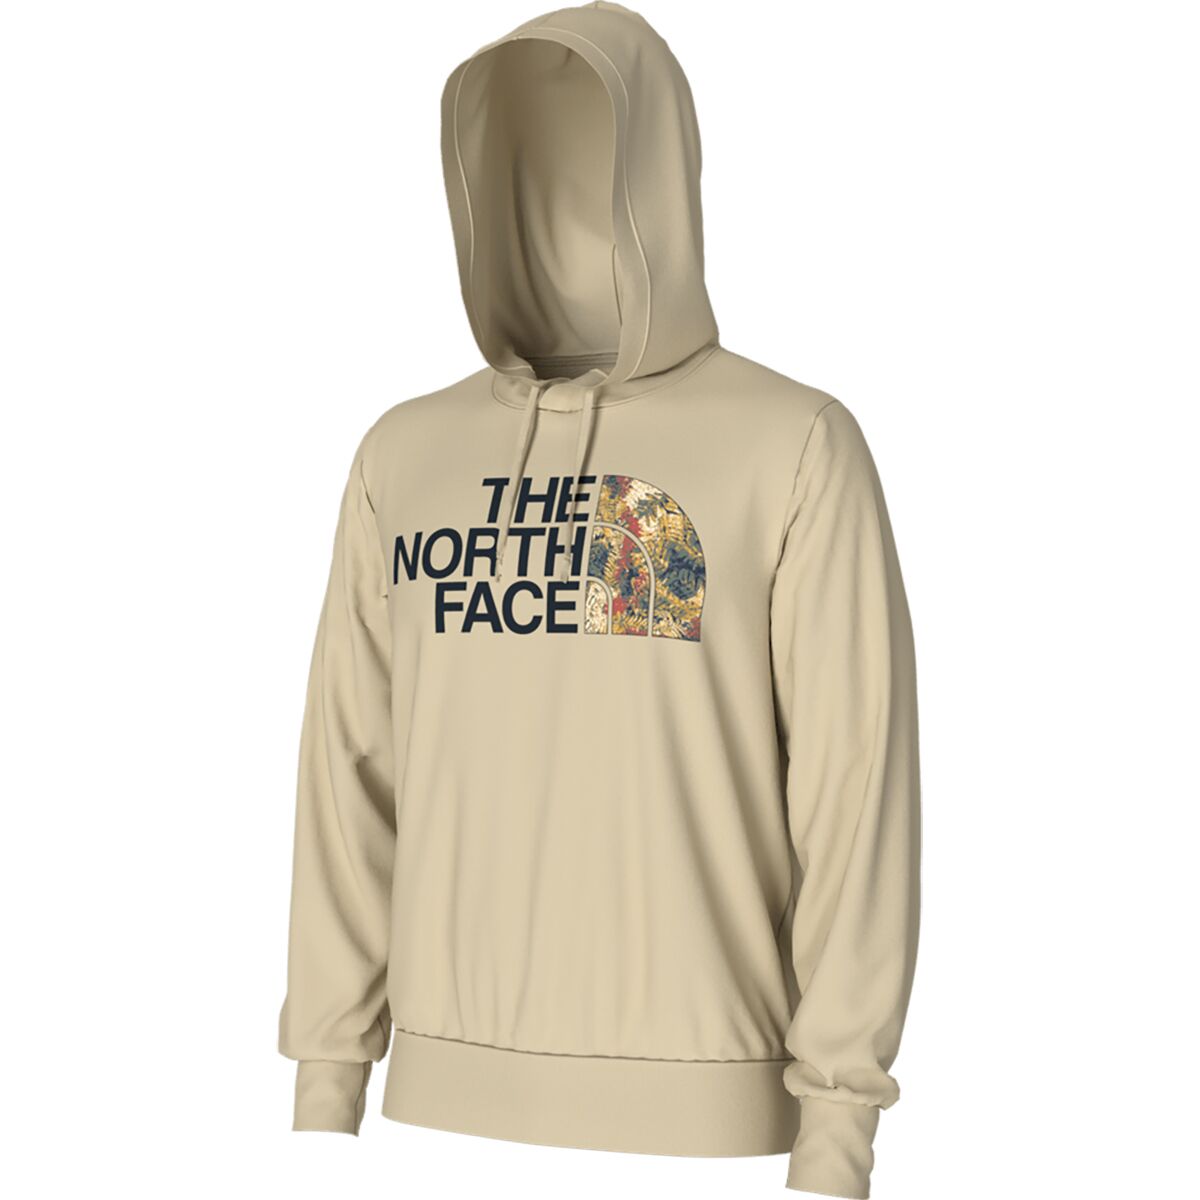 The North Face Half Dome Pullover Hoodie - Men's - Clothing